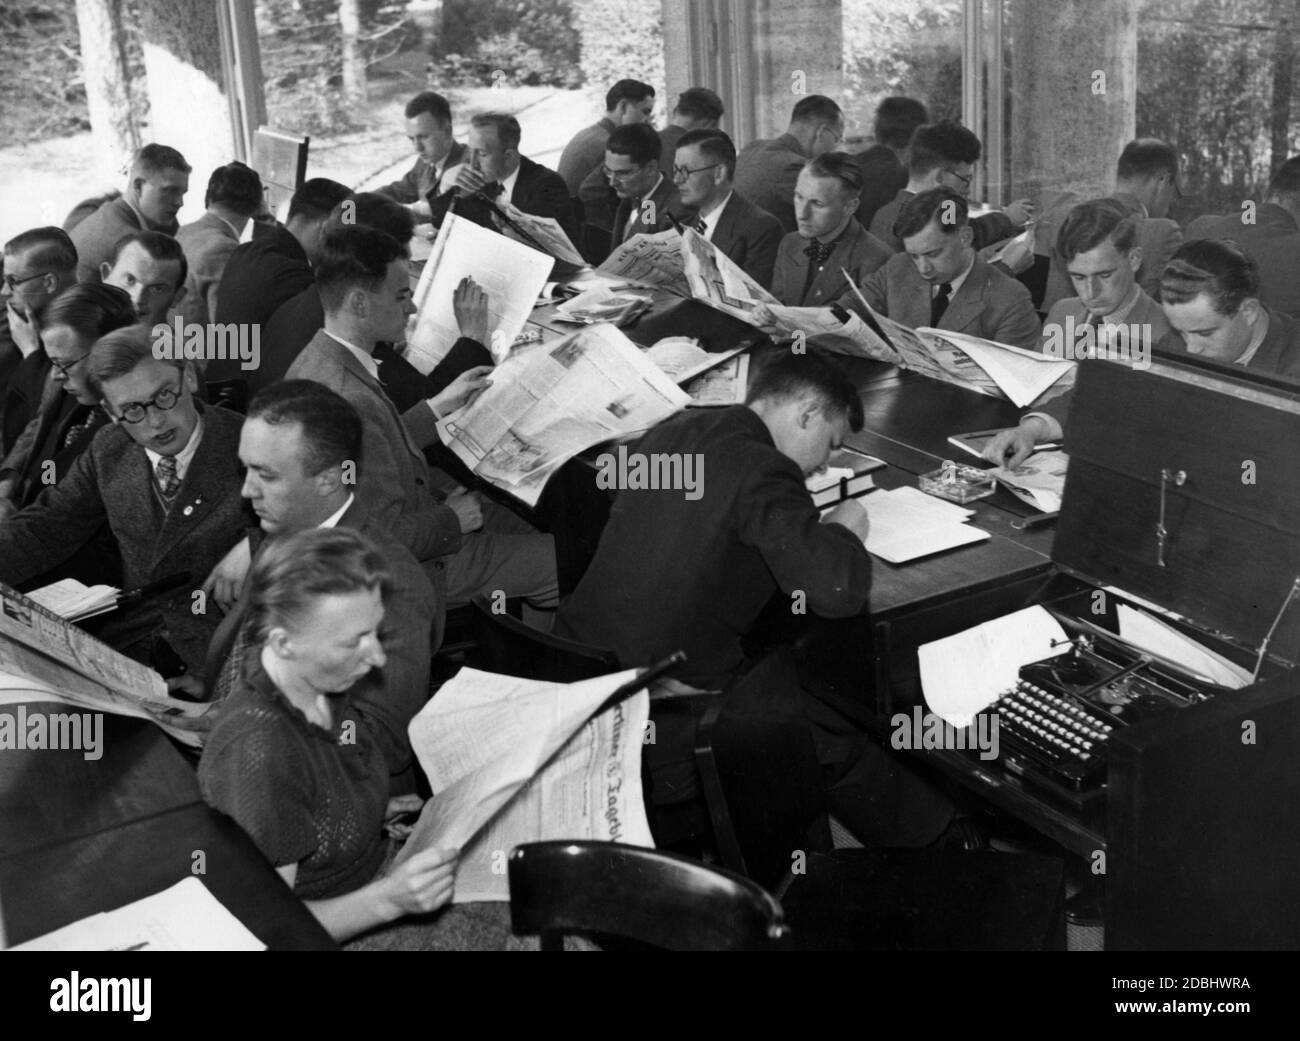 At the Reichspresseschule (Reich Press School), which opened in Berlin-Dahlem on 24 April 1936, a wide variety of German and foreign newspapers are read during working hours, including the Berliner Tageblatt. The typewriters for written work can be placed in the desks. Stock Photo